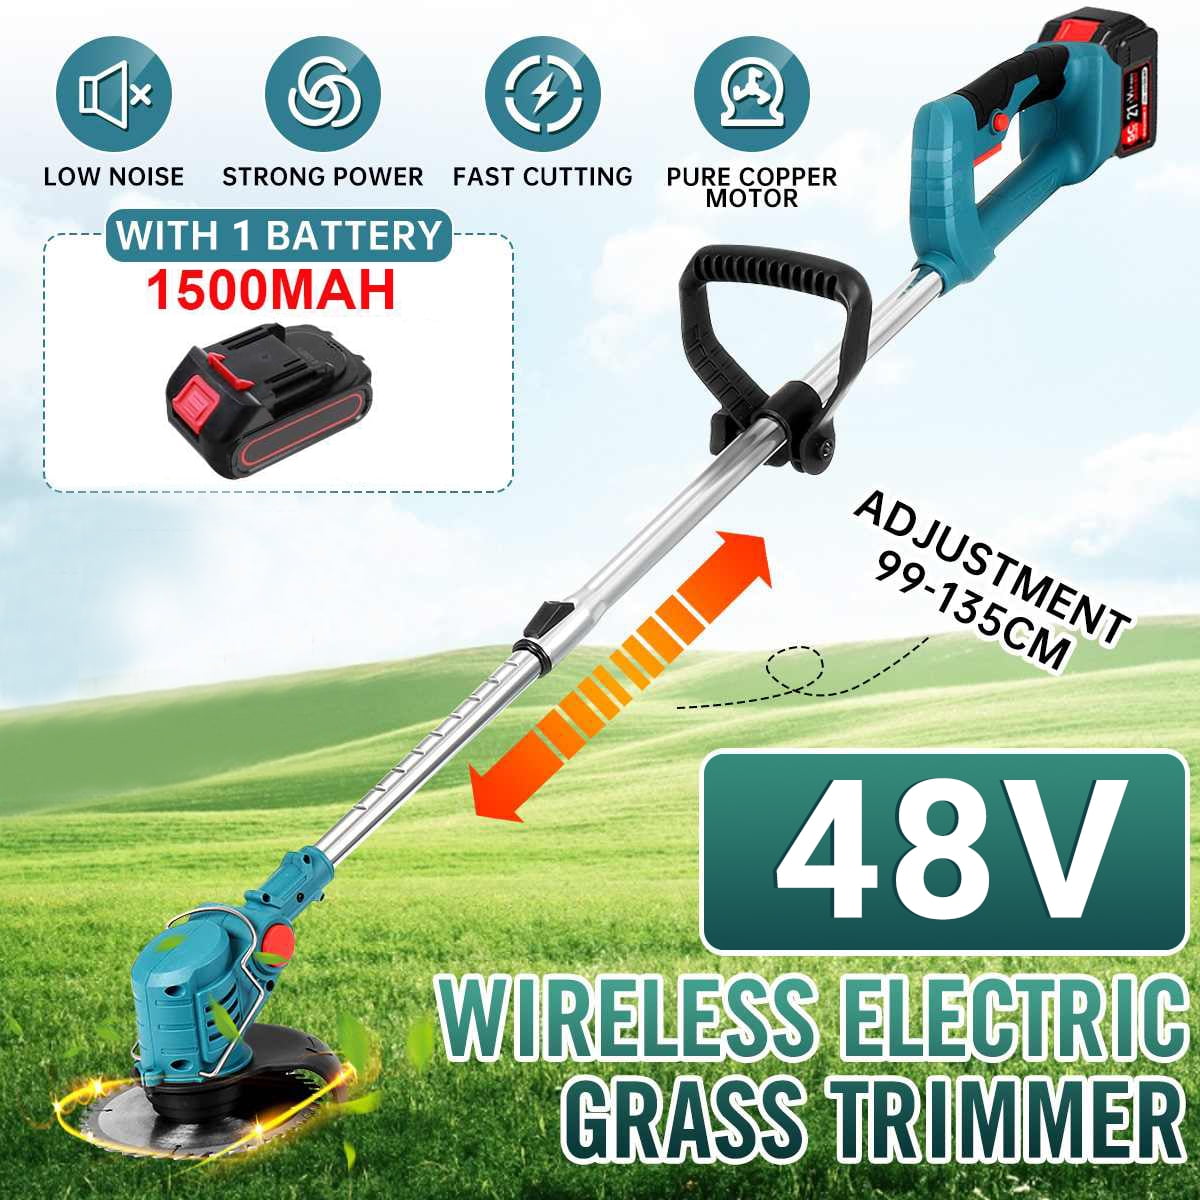 2.0Ah Lithium-ion Edger Battery Powered & Electric Grass Trimmer GardenJoy String Trimmer,12V Cordless Trimmer Lawn with Cutting Blade Adjustable Handle and Height for Weed Wacker,Yard and Garden 